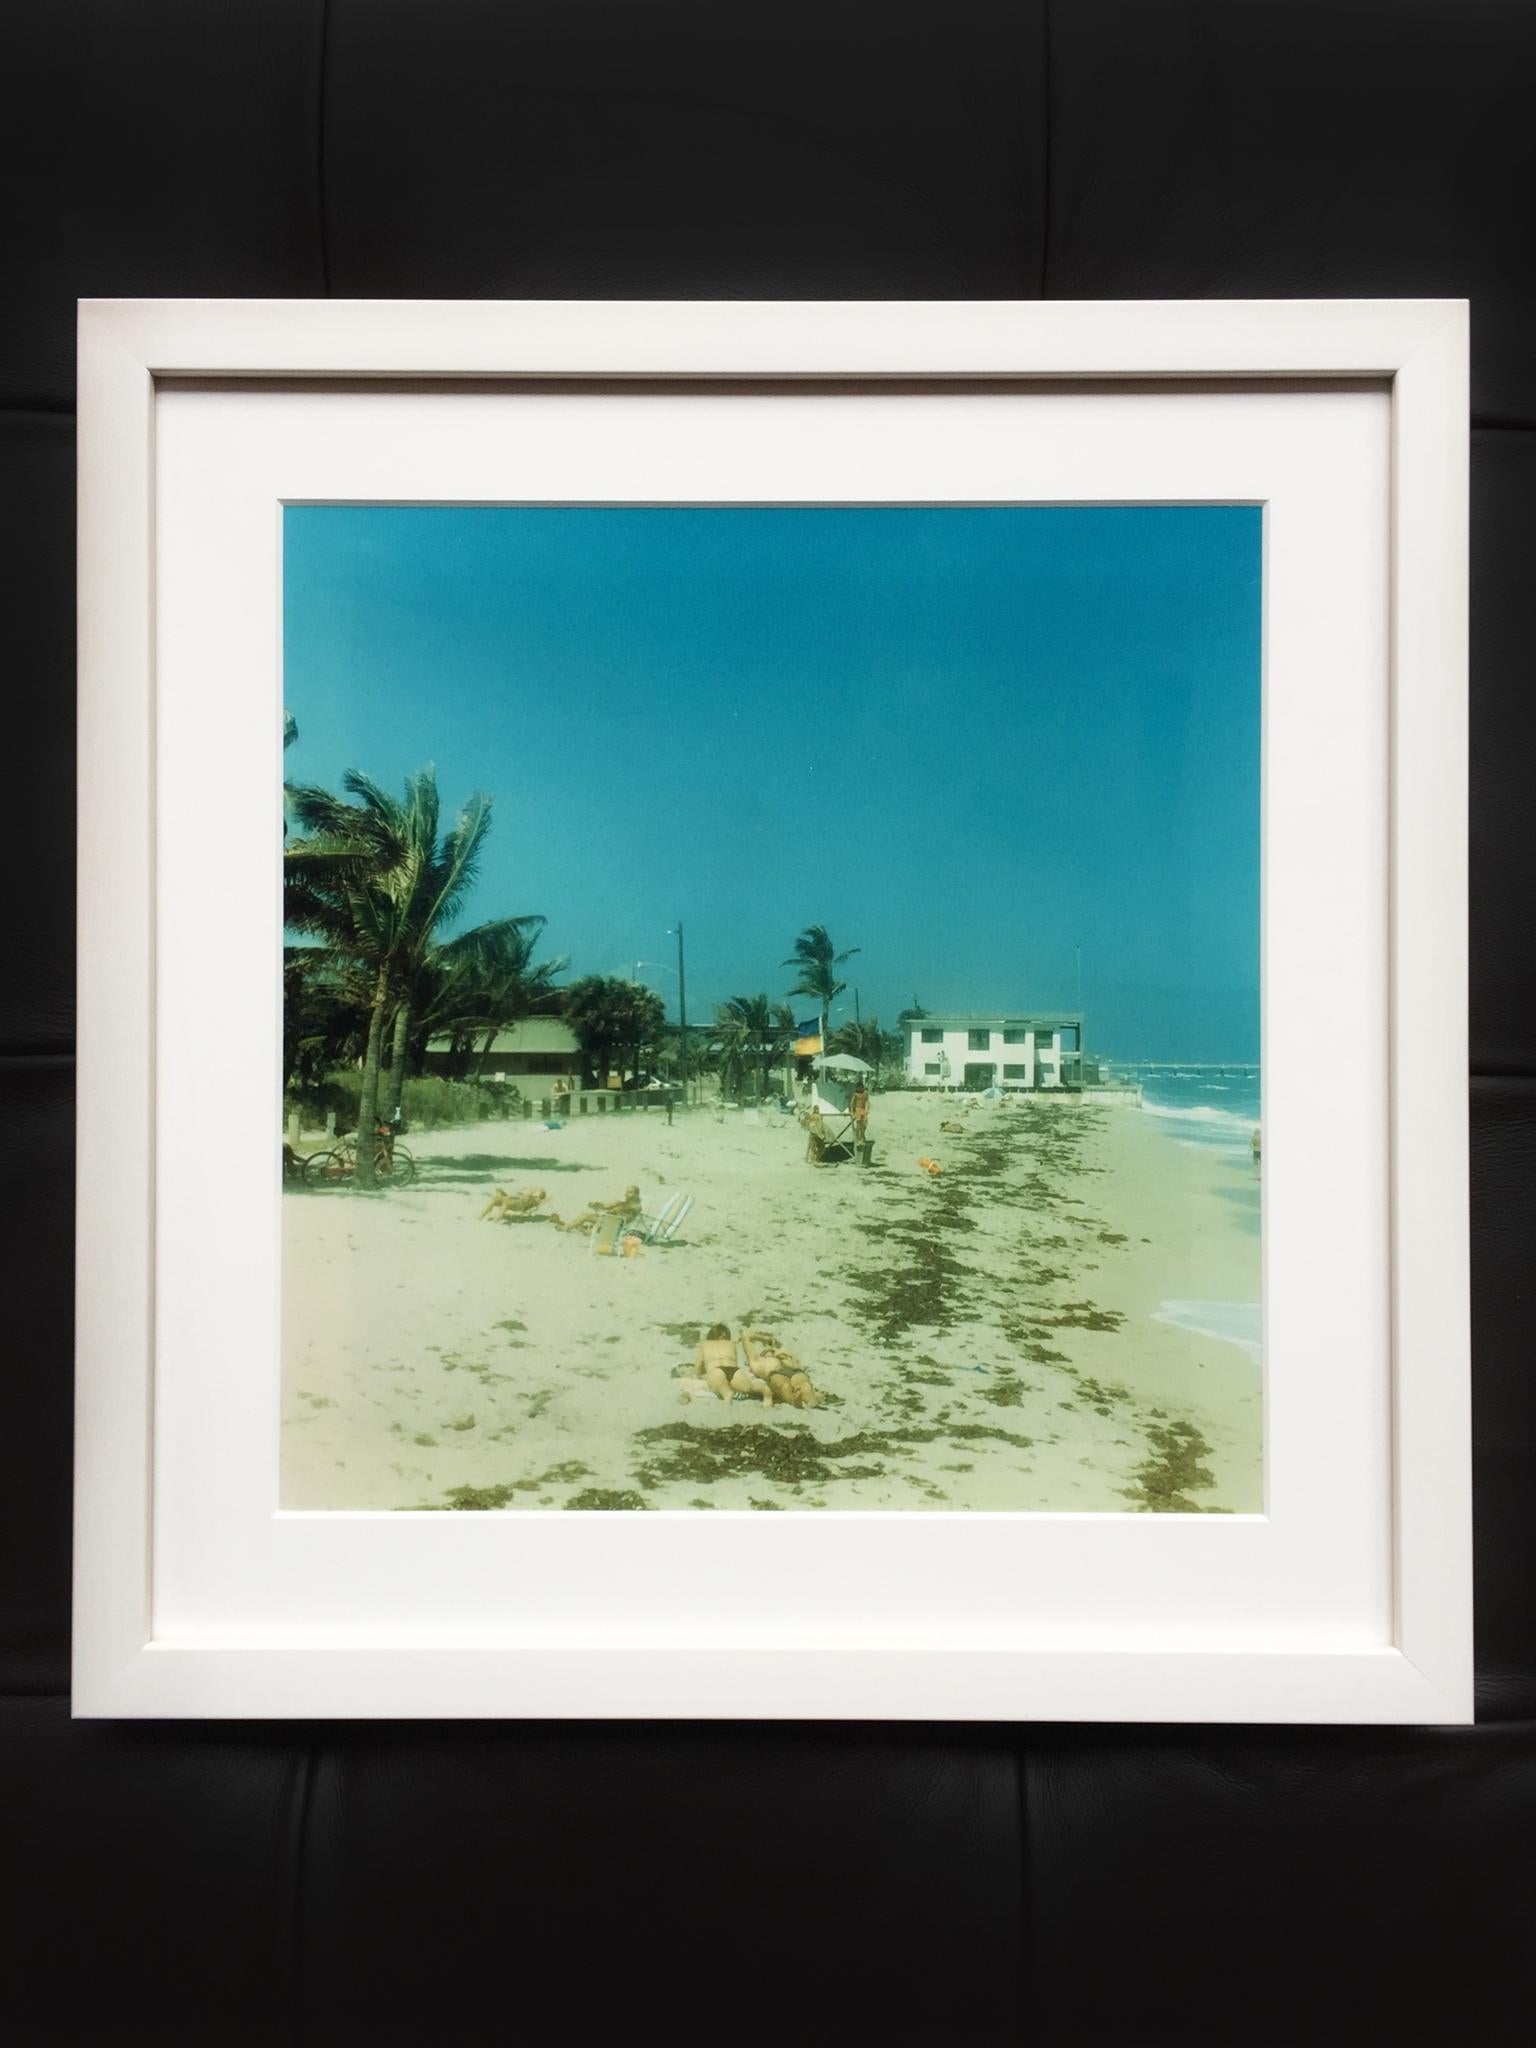 A beach scene photograph with breathtaking color, by the esteemed artist Jack Pierson. This photograph is newly framed with museum-grade framing and glass. There is also glass on the backside to feature the artist's signature.

Jack